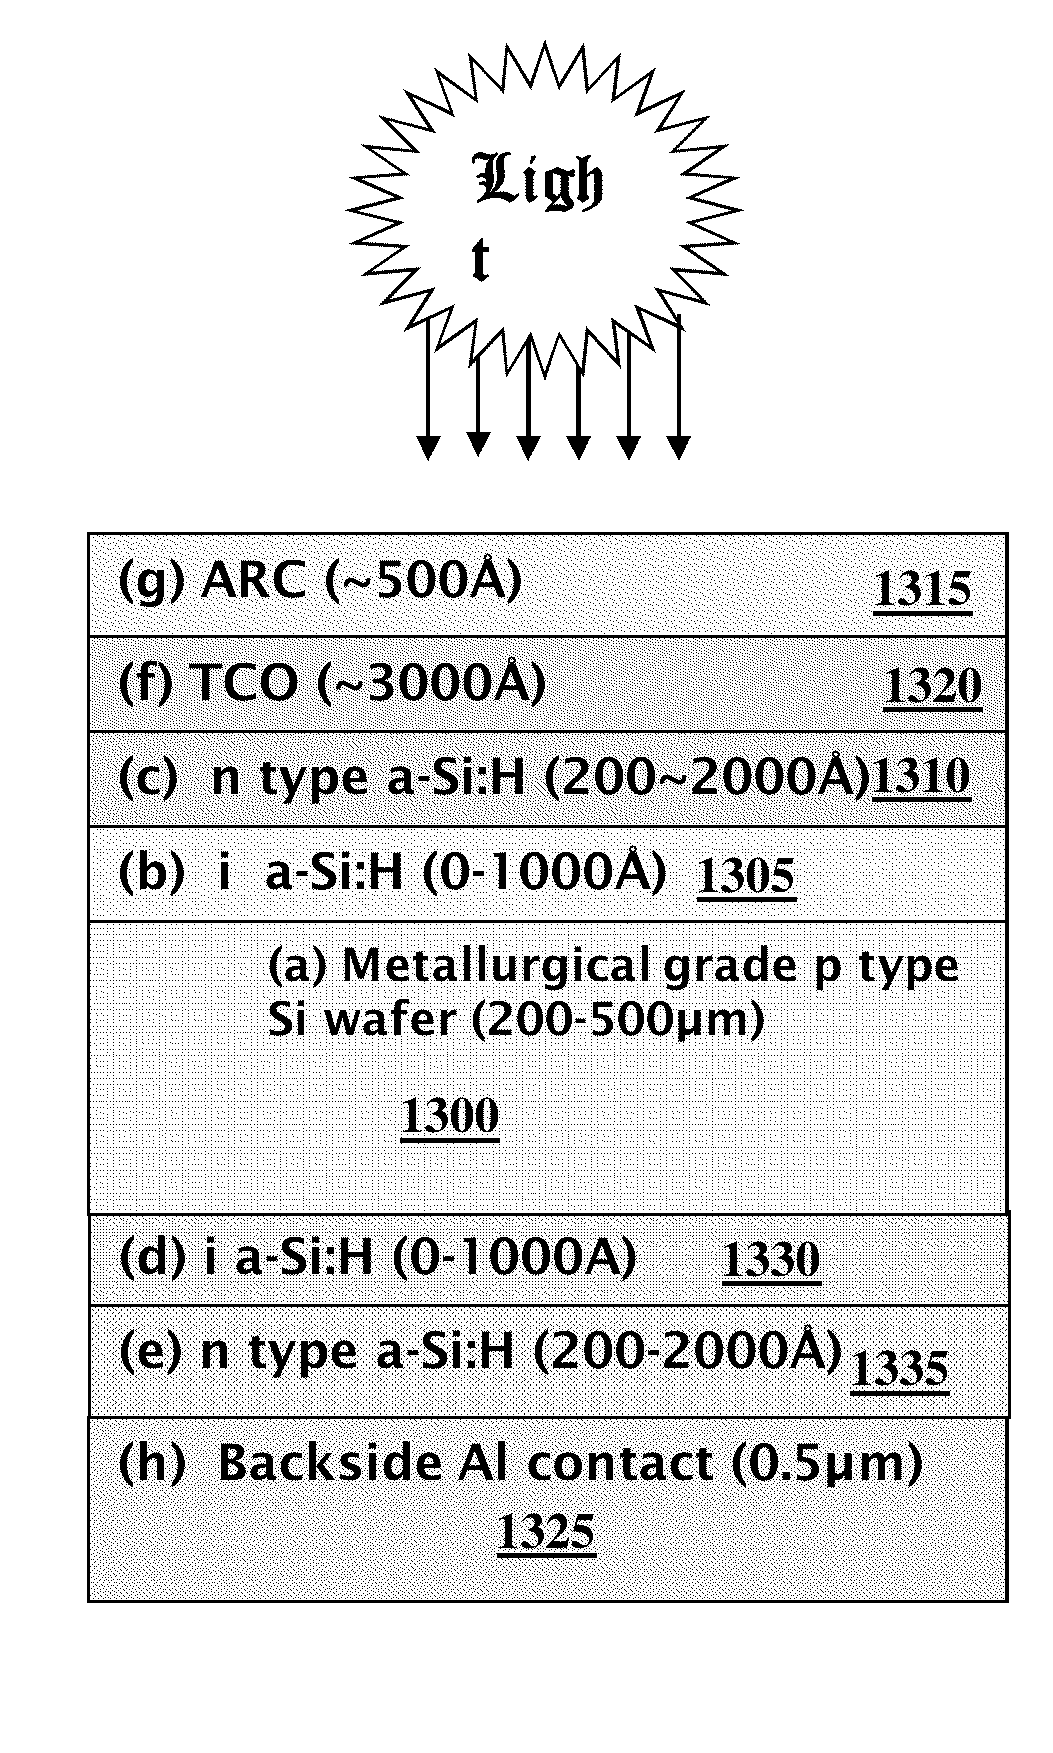 Low-cost multi-junction solar cells and methods for their production